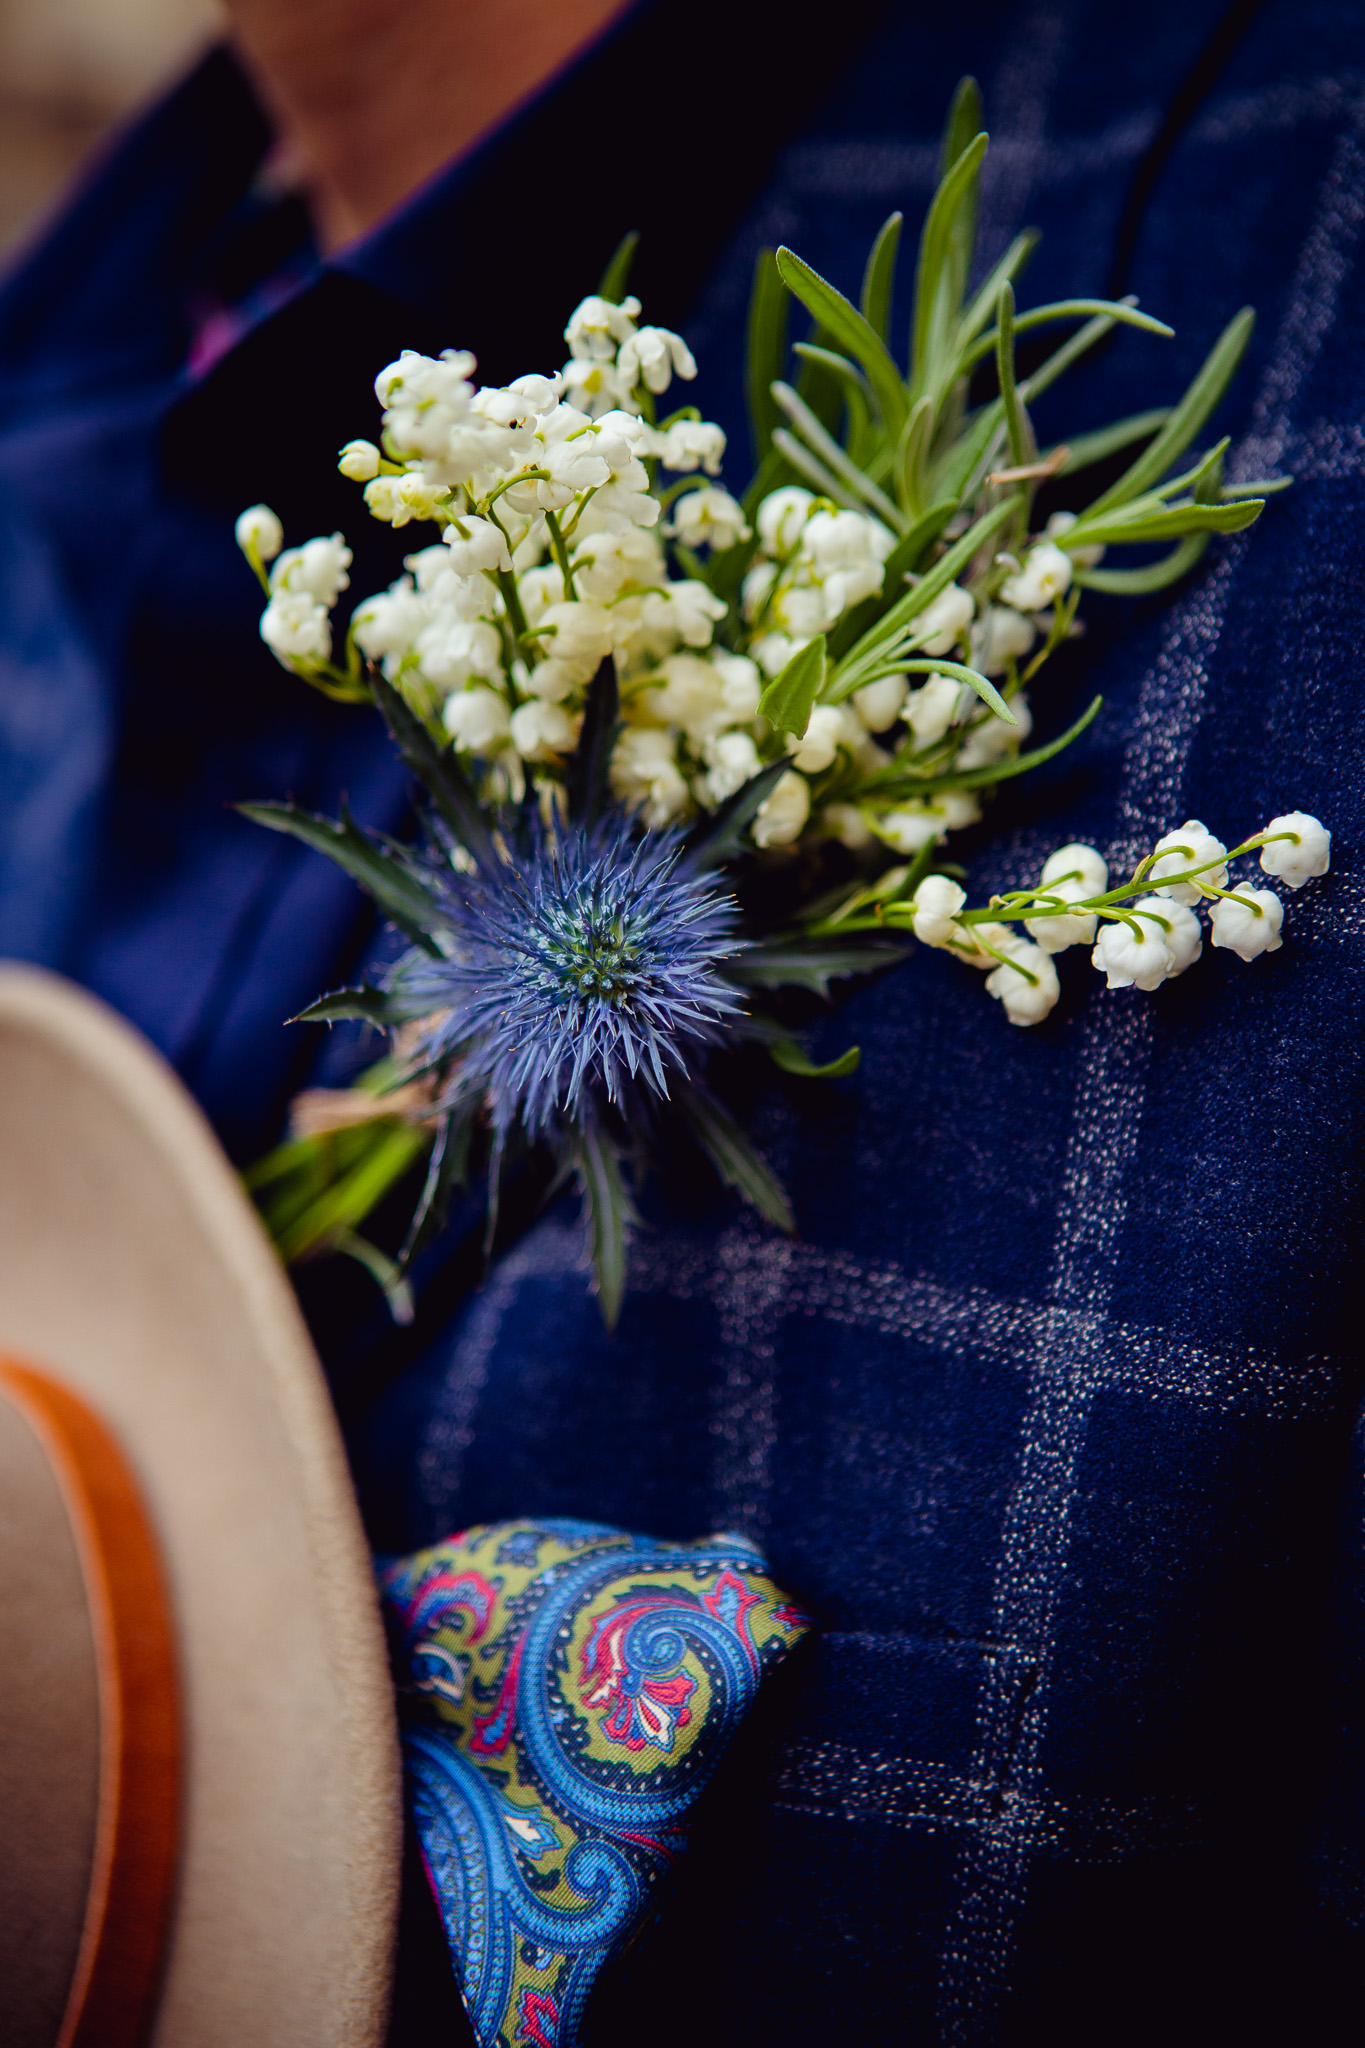 Close-up of the groom's white and blue flower lapel in his blue suit buttonhole.